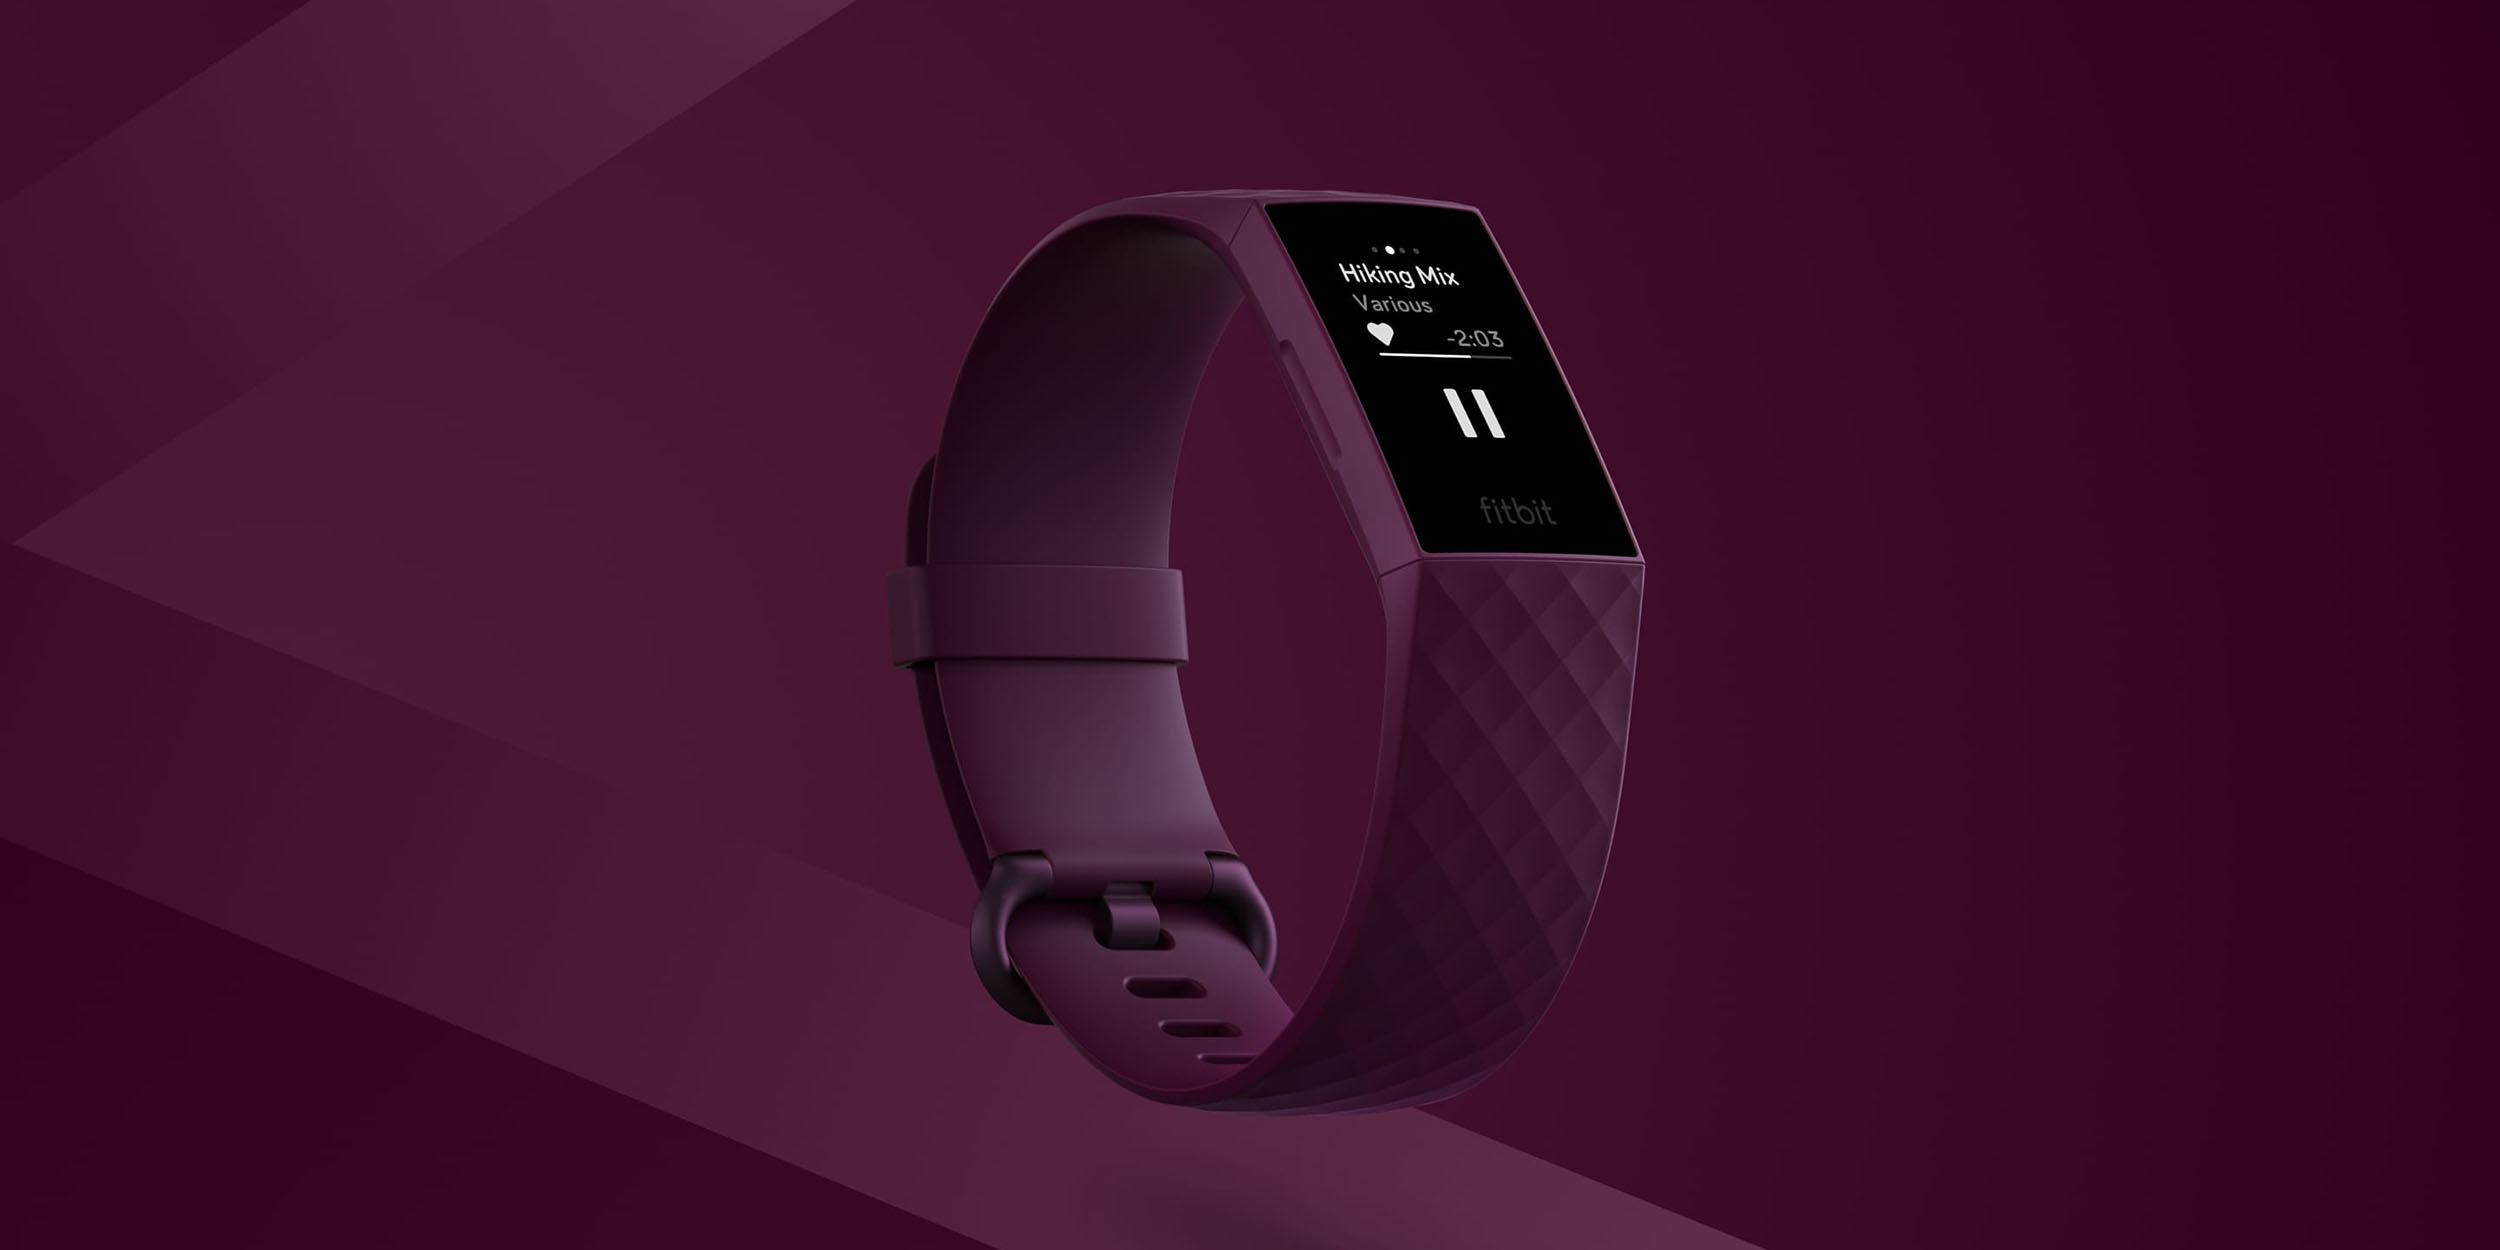 Fitbit Charge 4 tracker adds onboard GPS and Spotify control